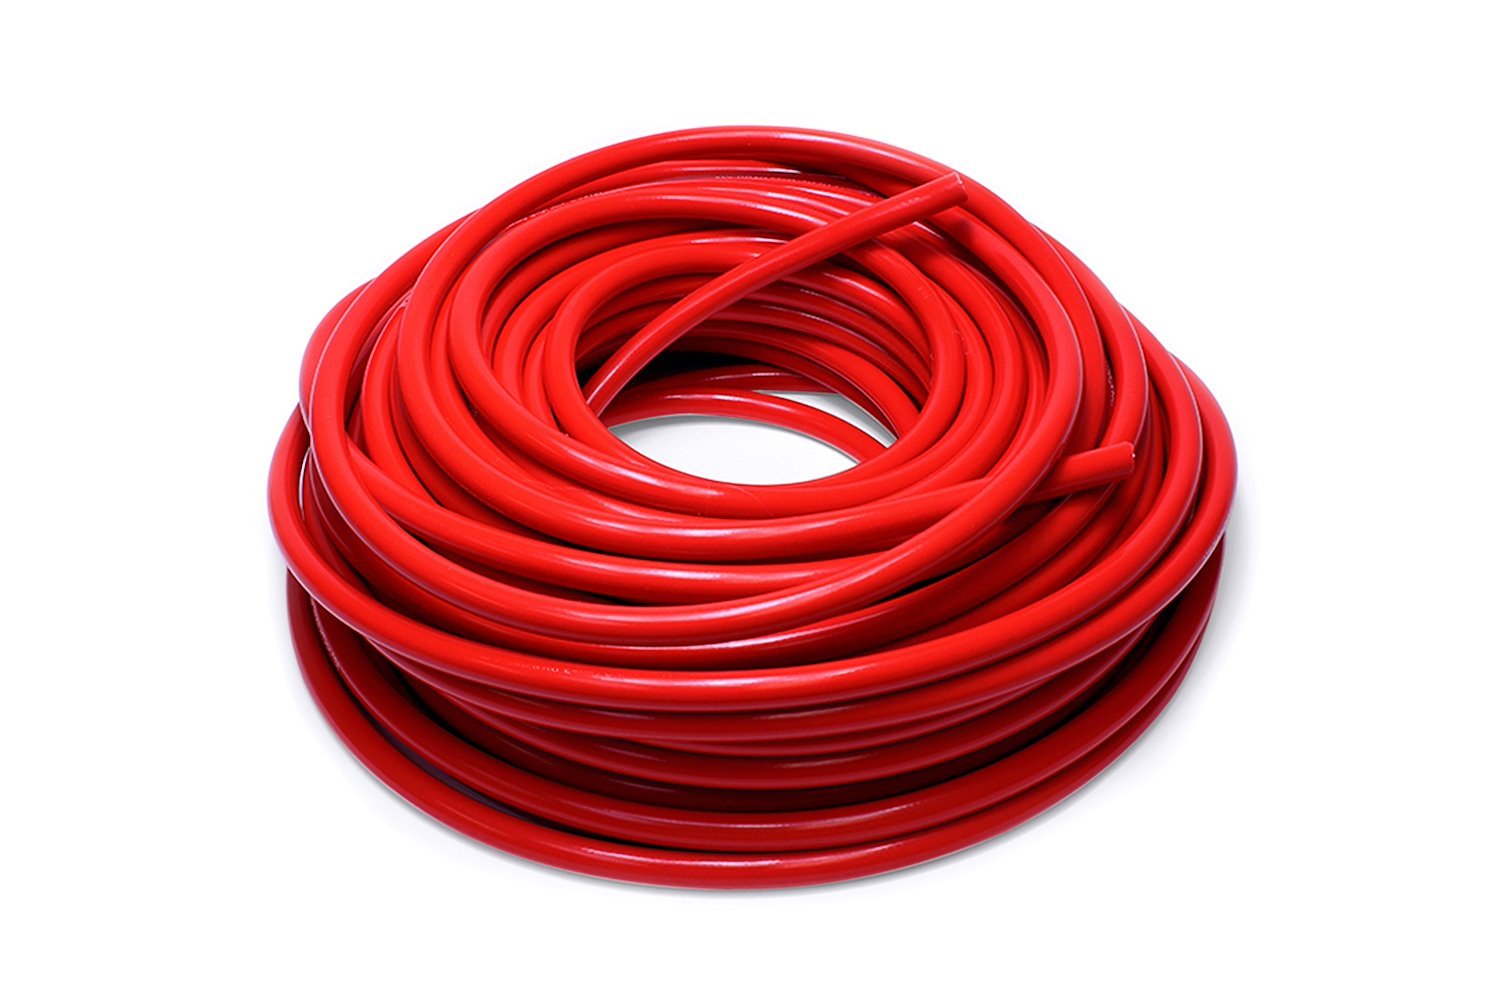 HTHH-016-REDx100 Silicone Heater Hose Tubing, High-Temp Reinforced, 5/32 in. ID, 100 ft. Roll, Red